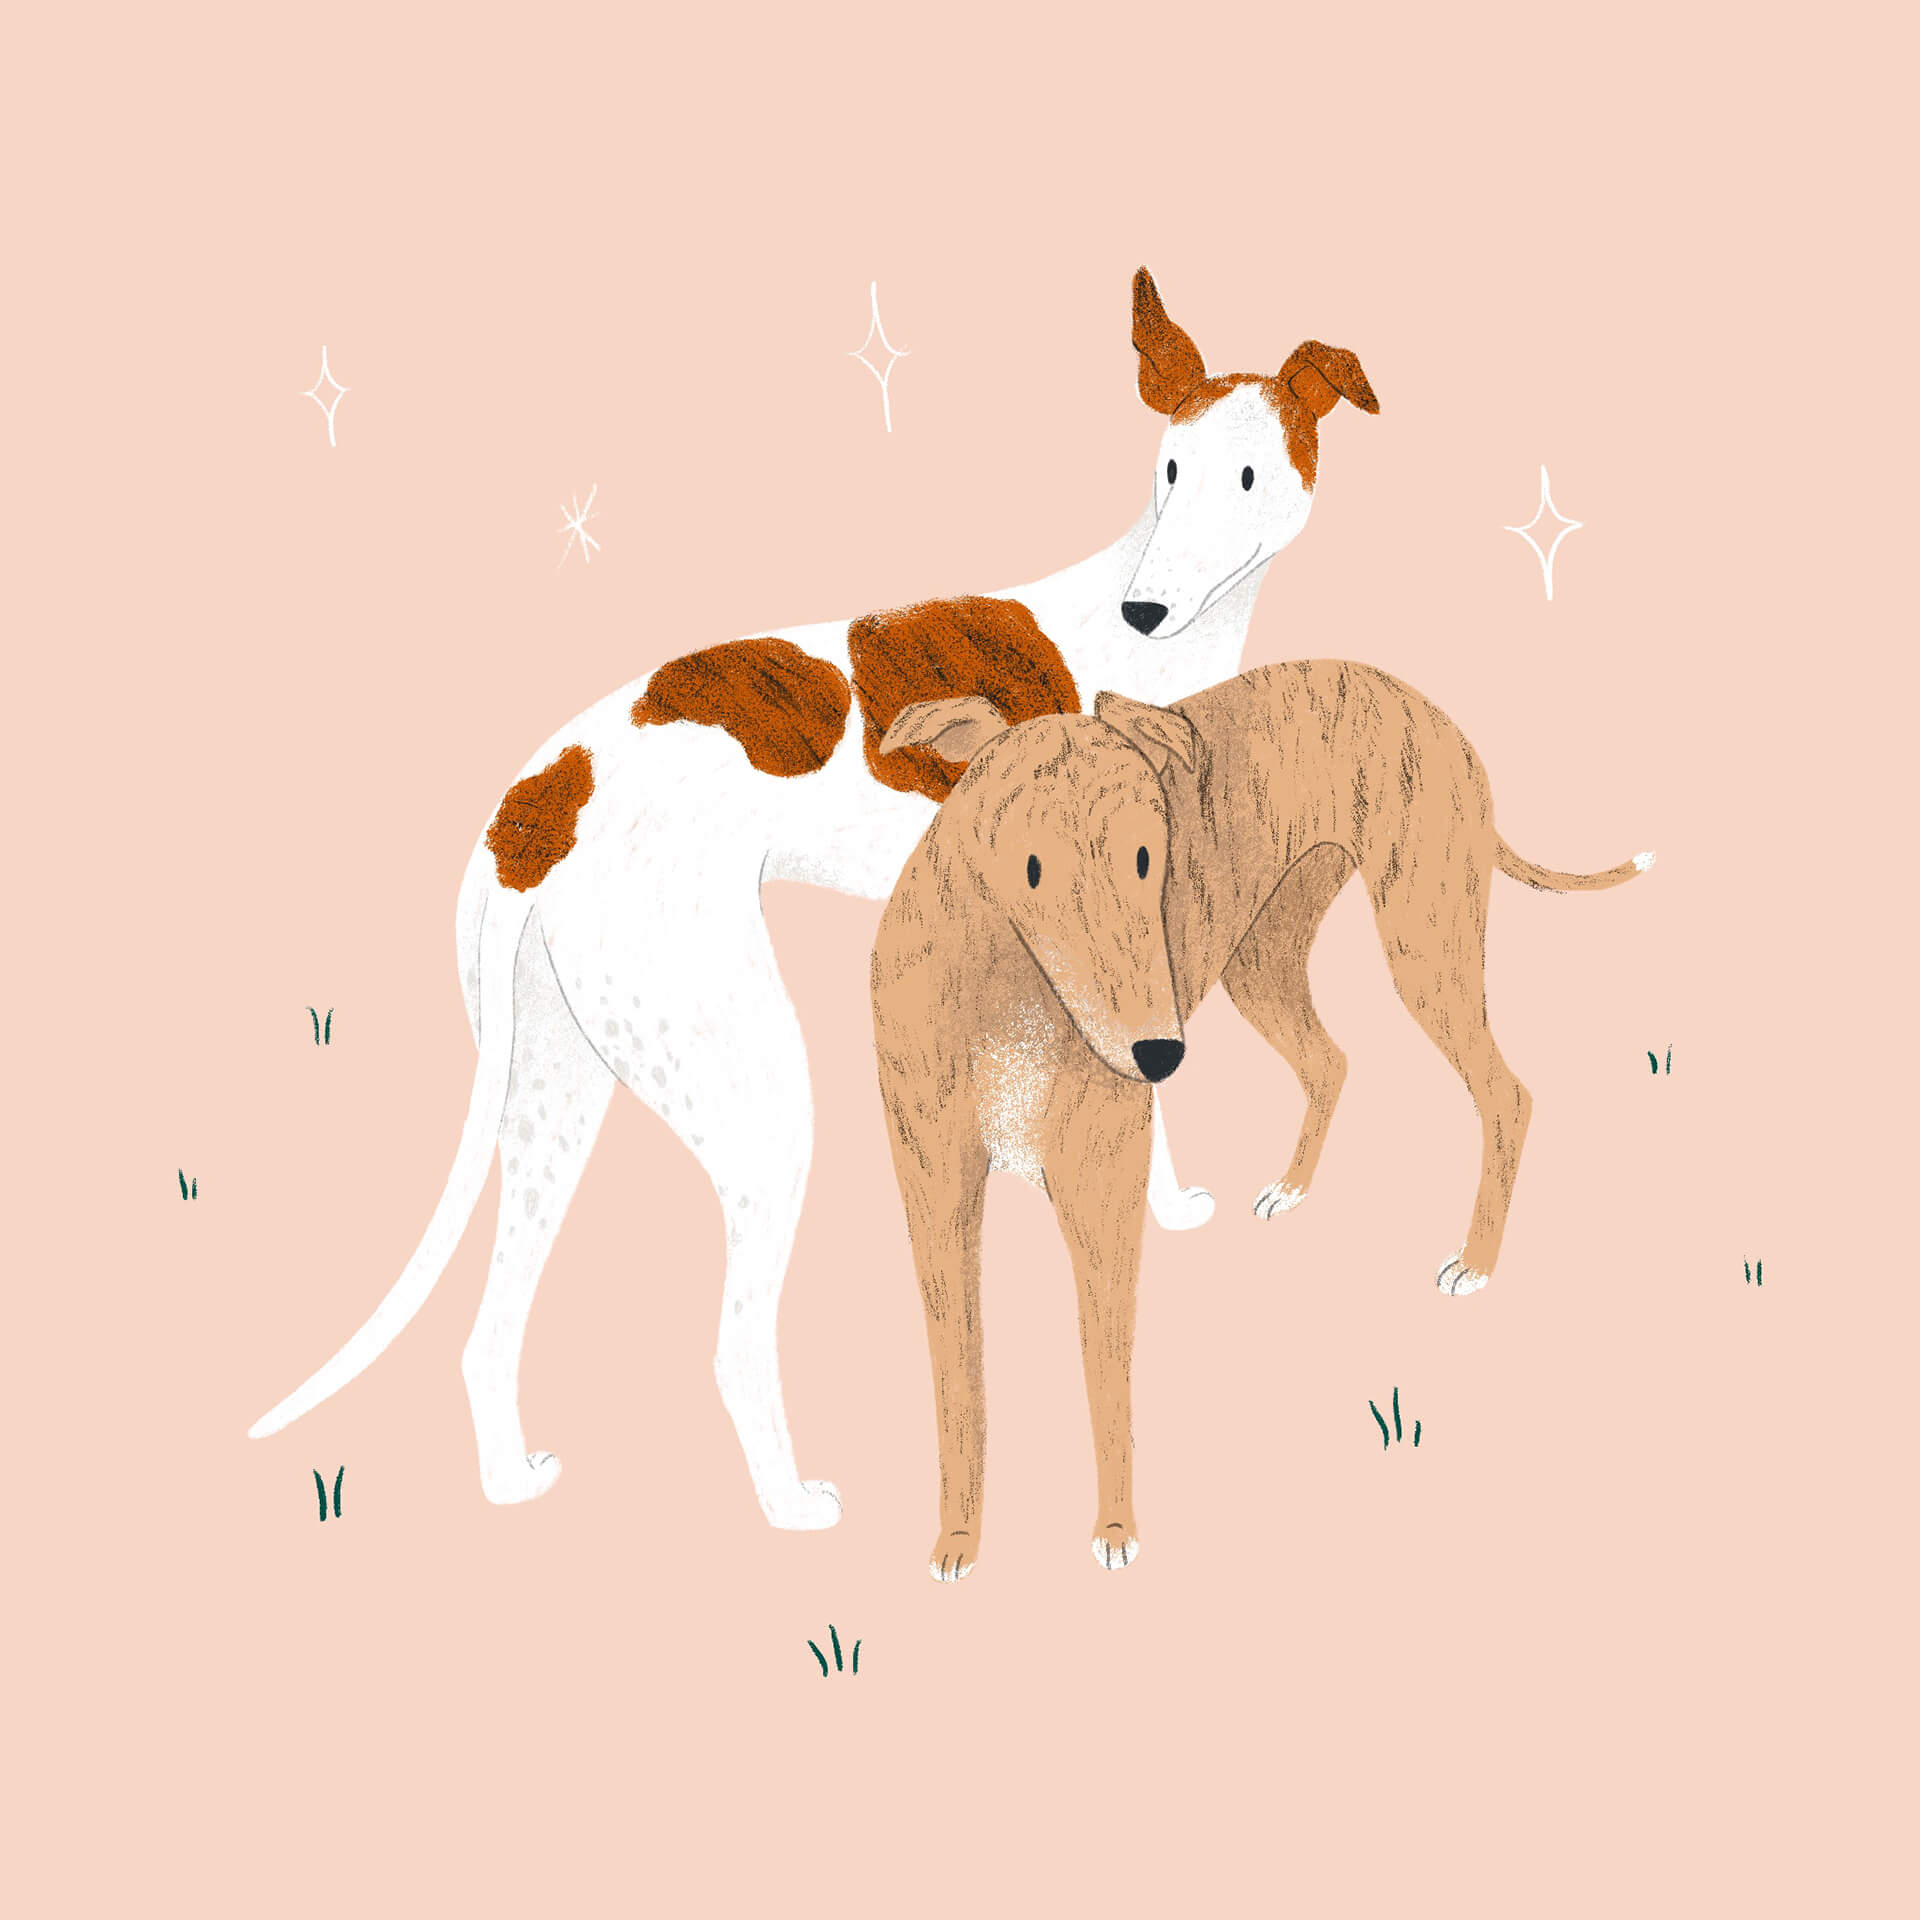 An illustration of two greyhounds. One is white and red and the other is brindle coloured.